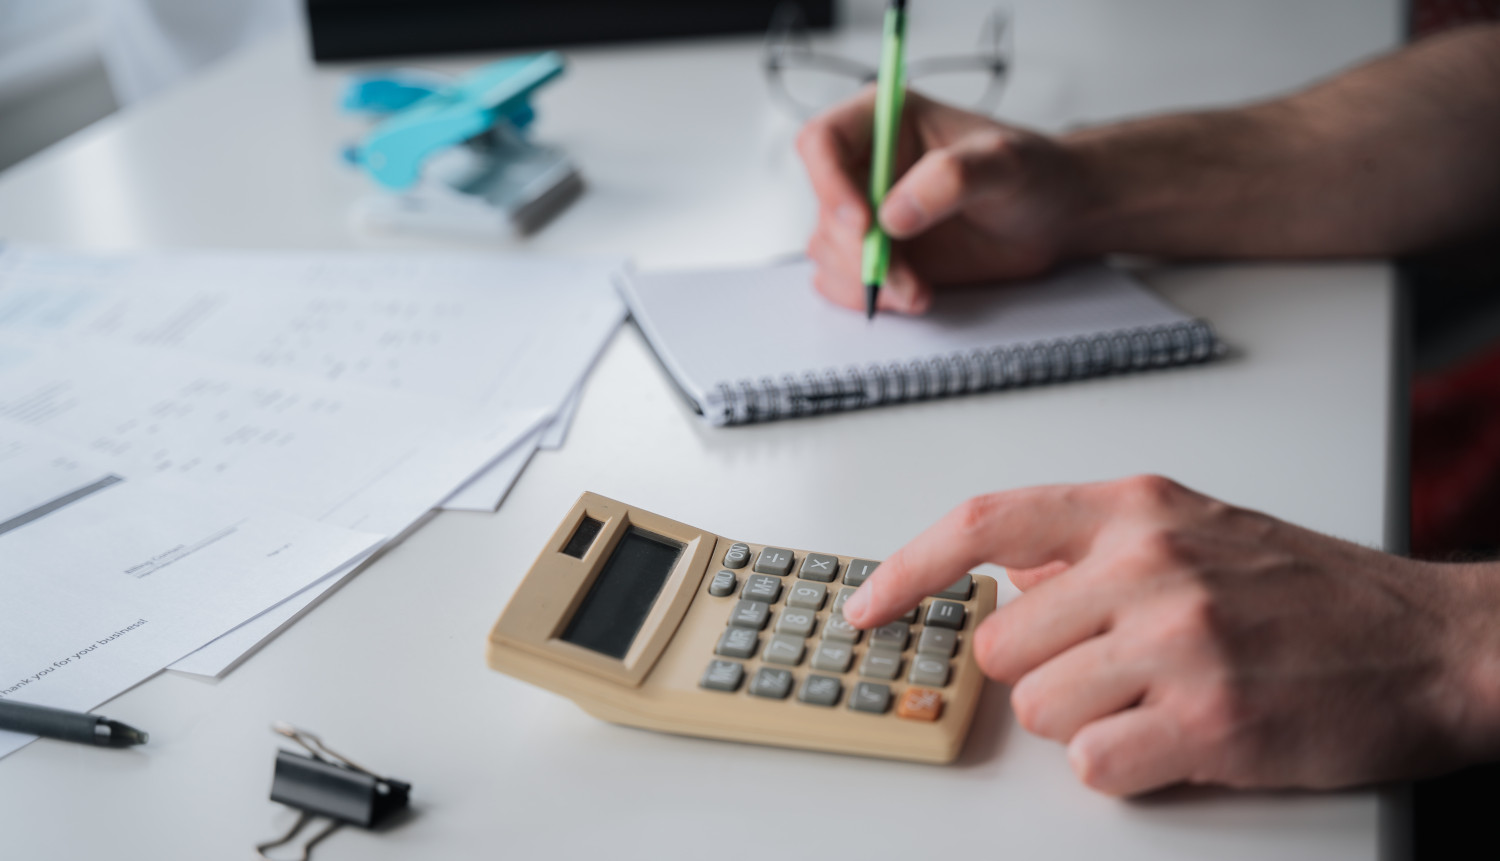 An image of an accountant calculating finances and balancing numbers.